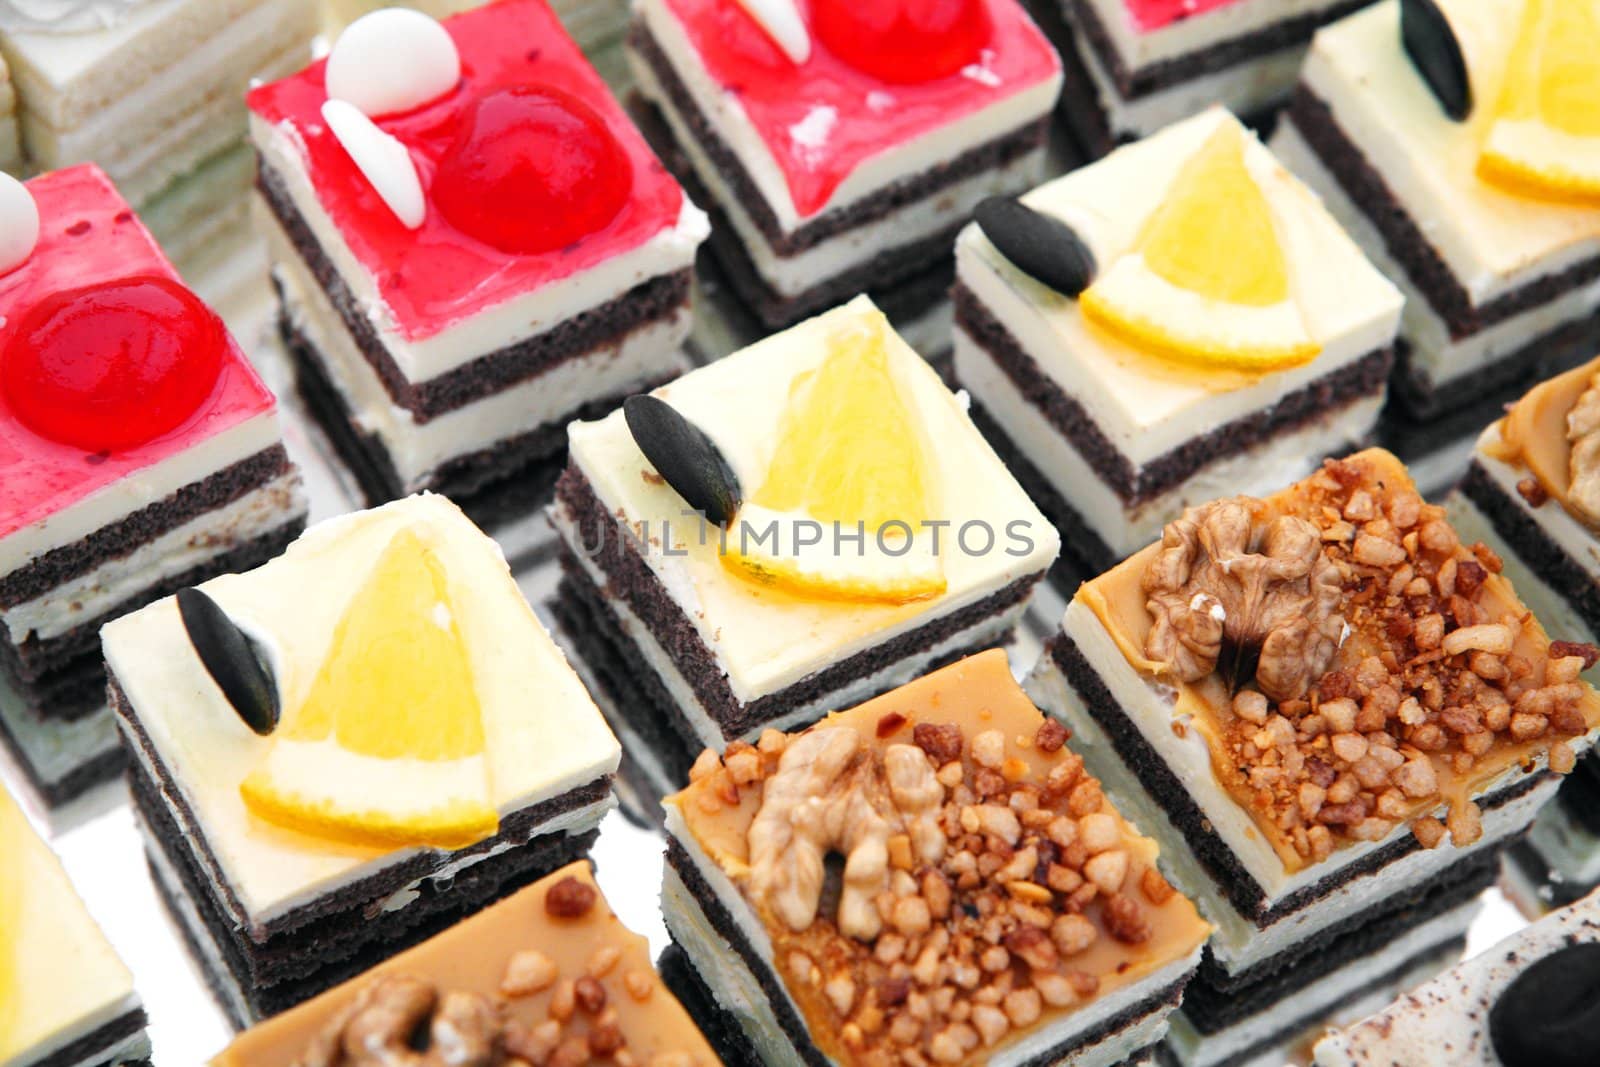 Colorful small fruity and chocolate dezerts